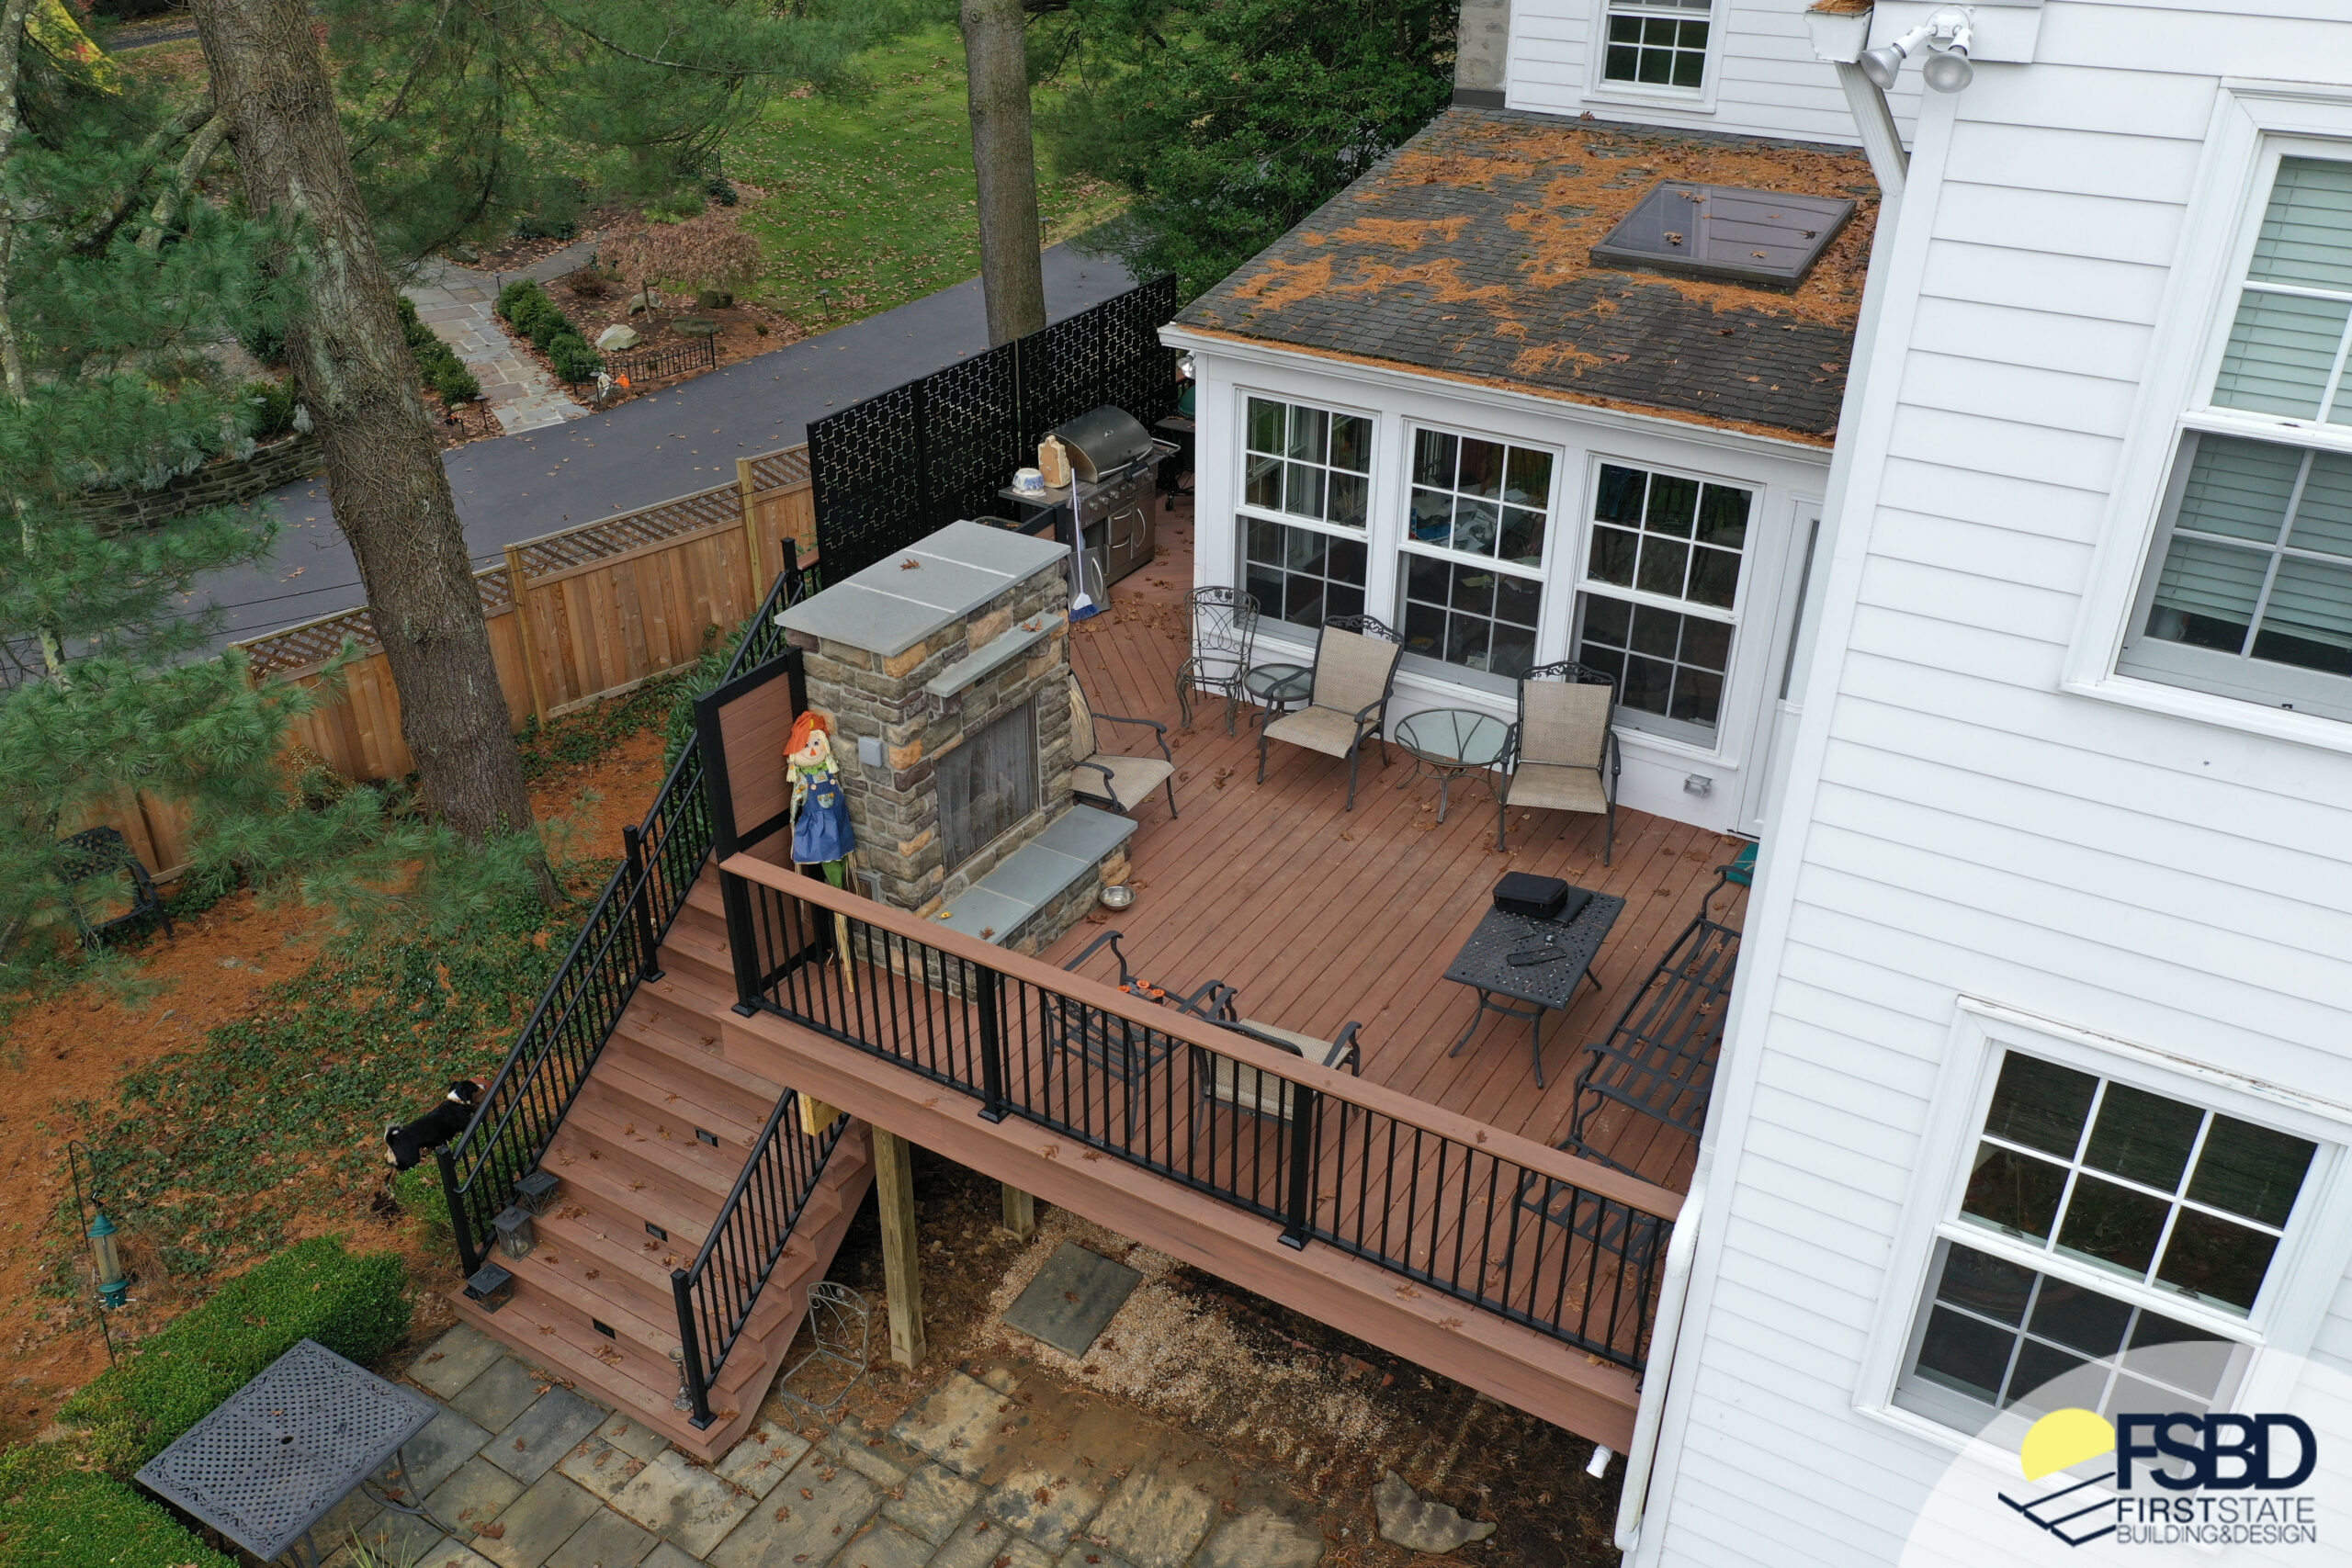 Aerial view of outdoor fireplace on deck